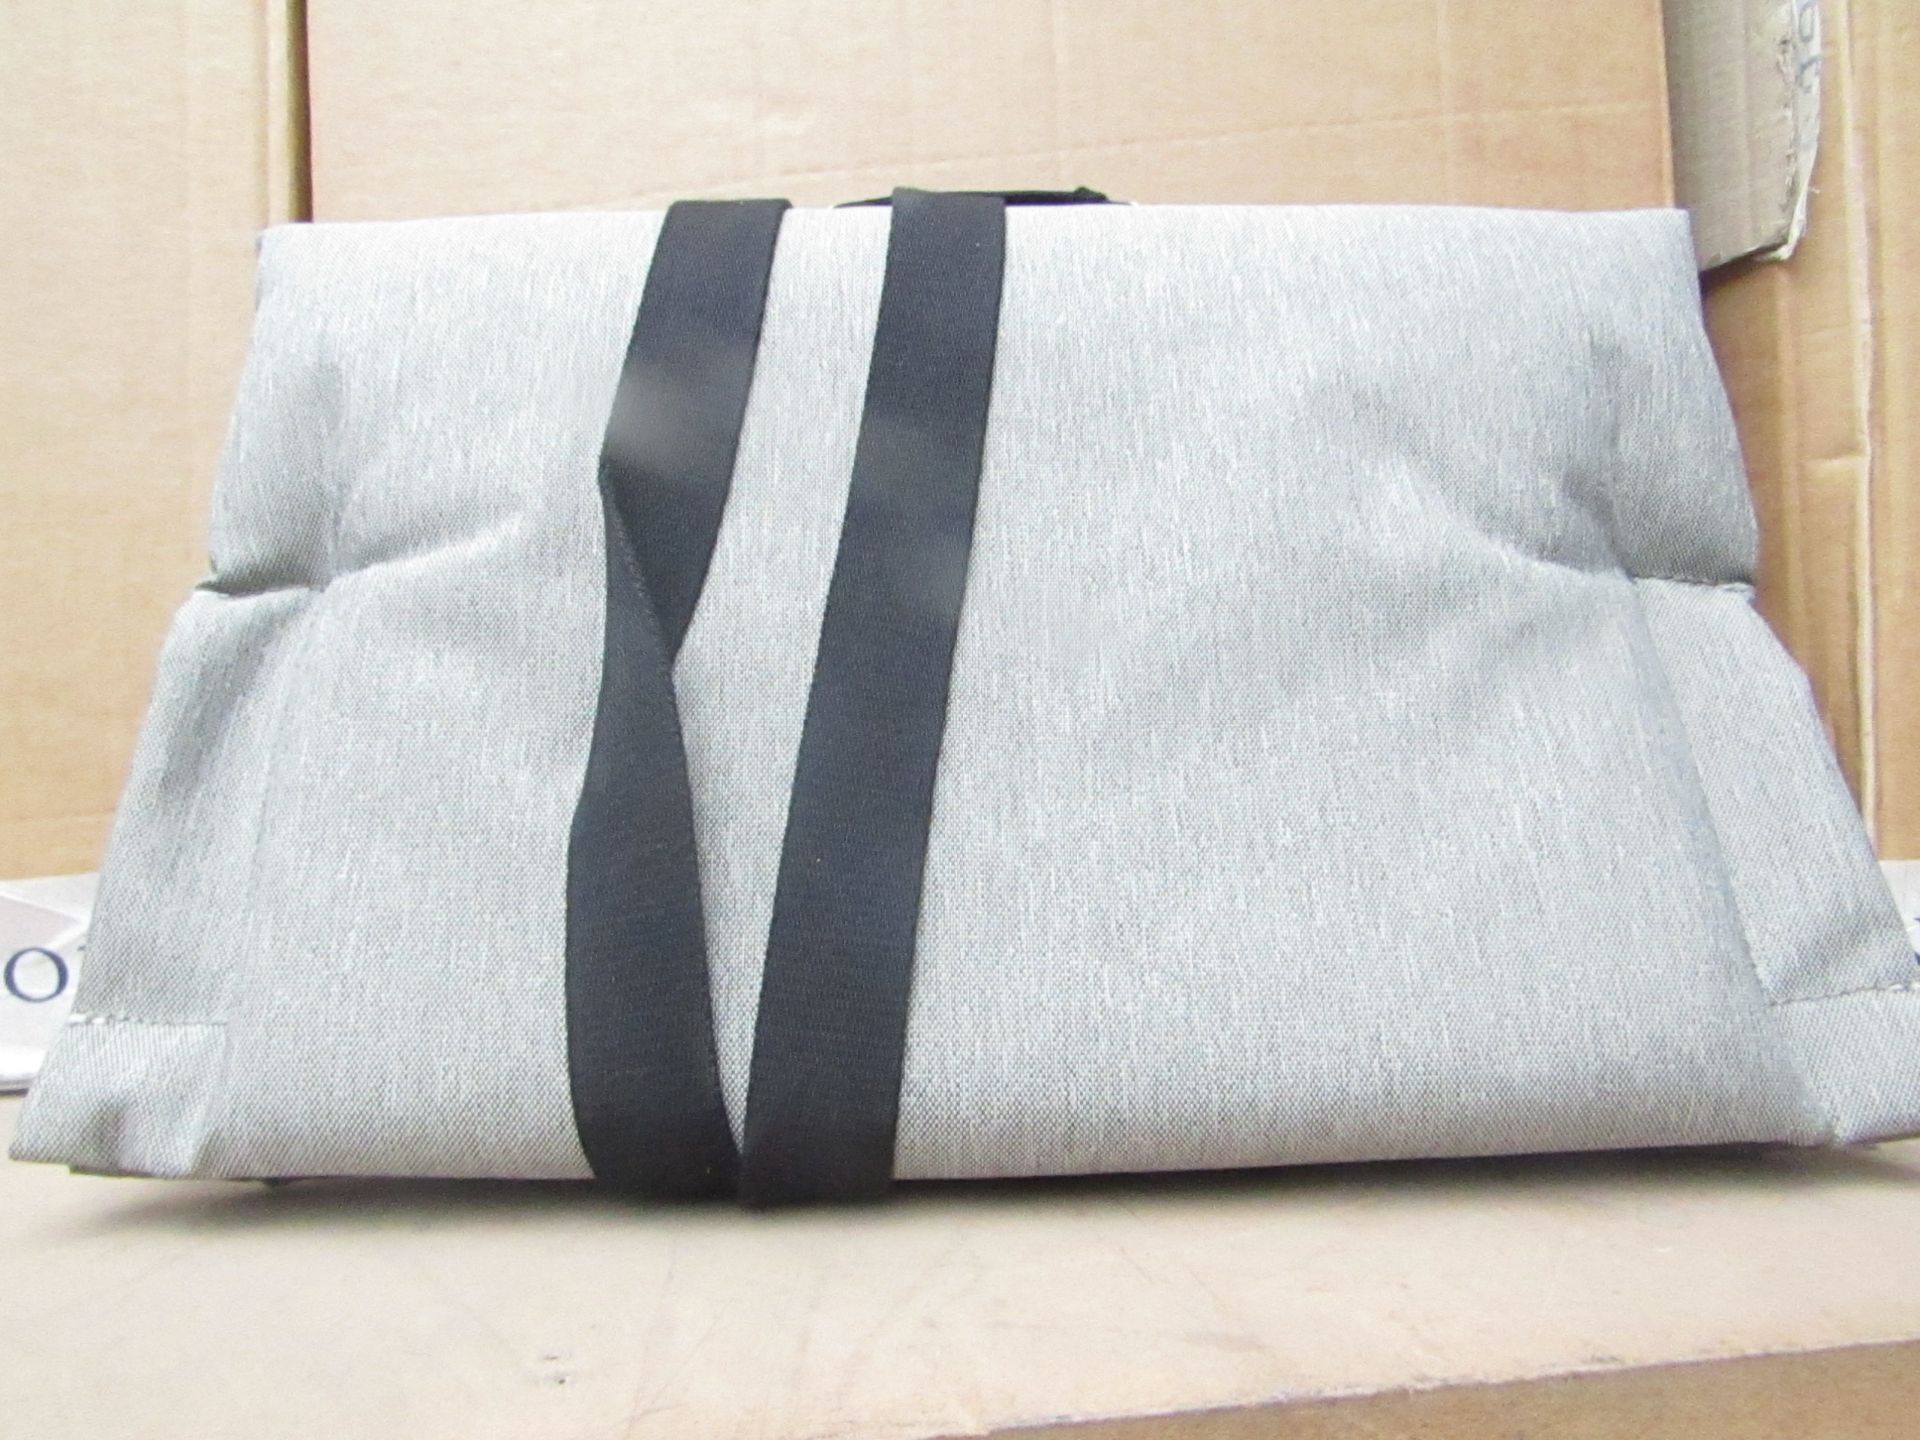 Coteetciel pillow stand for iPad, new with tags.